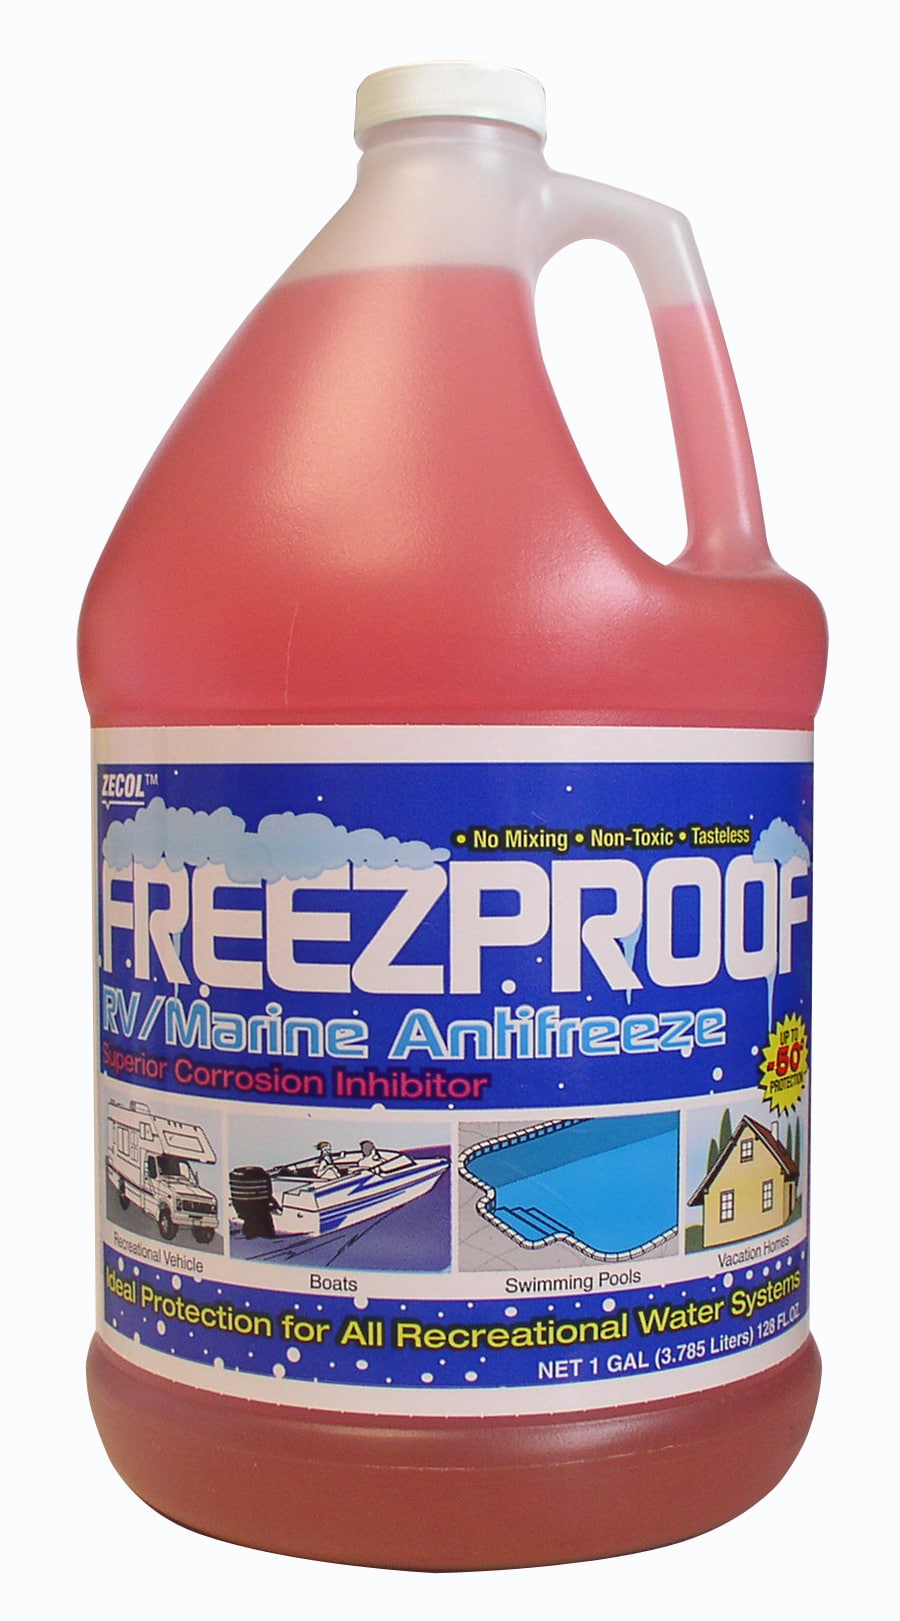 Concentrated Window Washer Fluid Antifreeze 55-gal drum